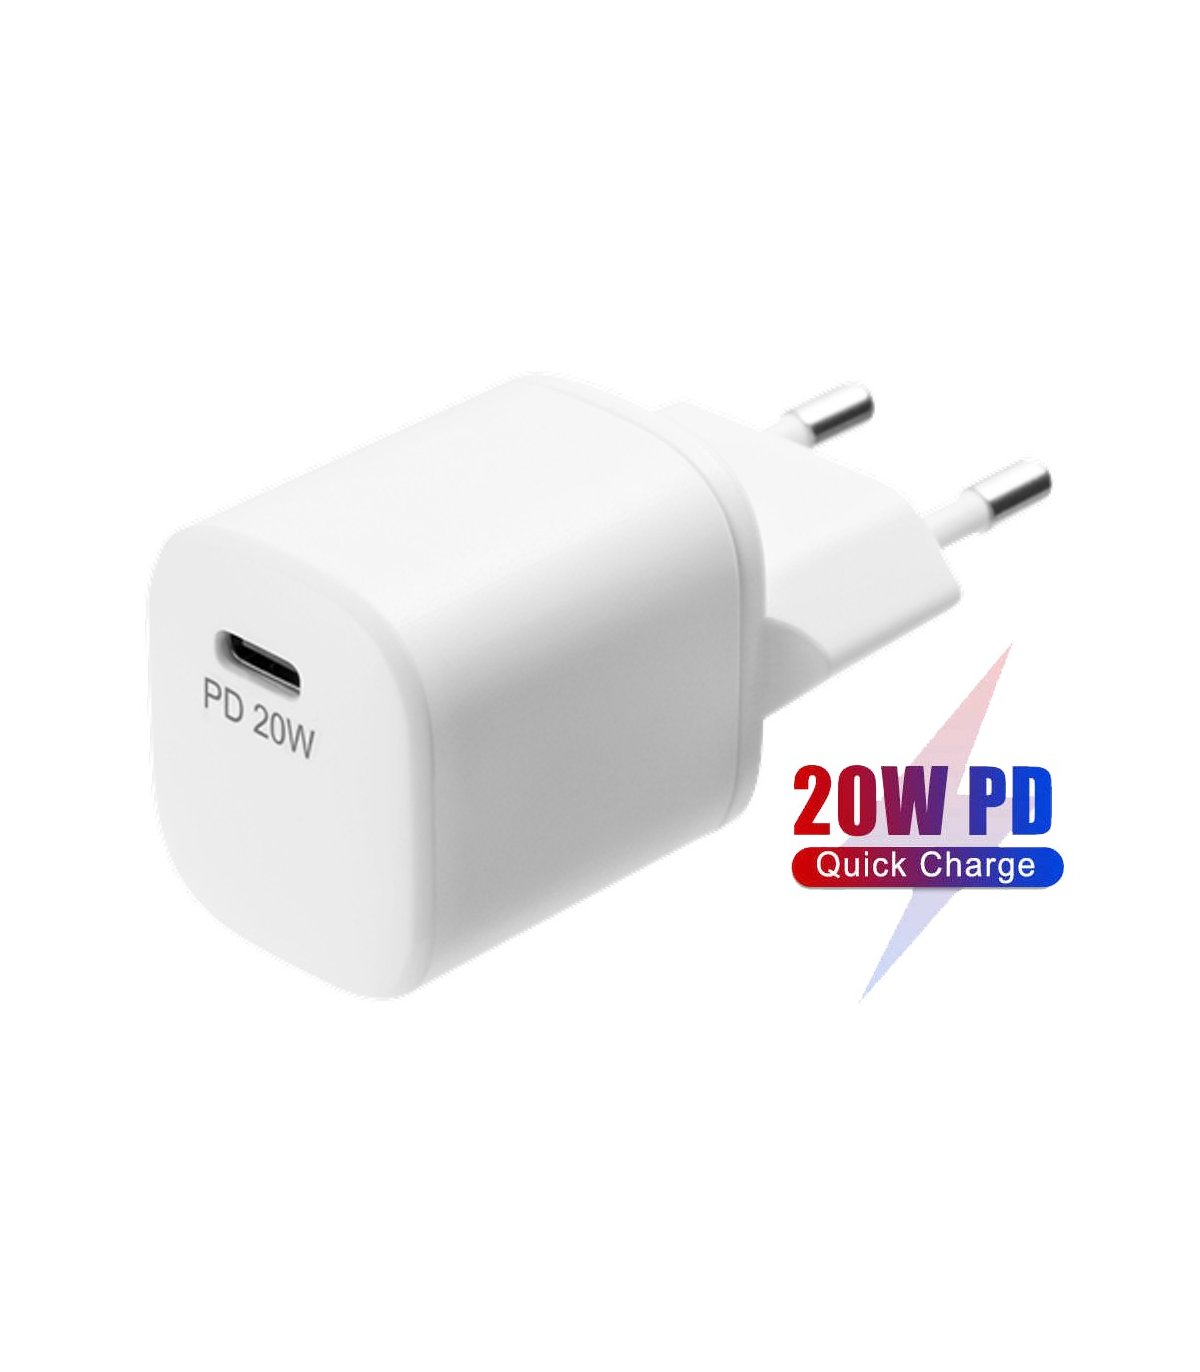 20W USB-C PD (USB Power Delivery) Fast Charger, EU/CE